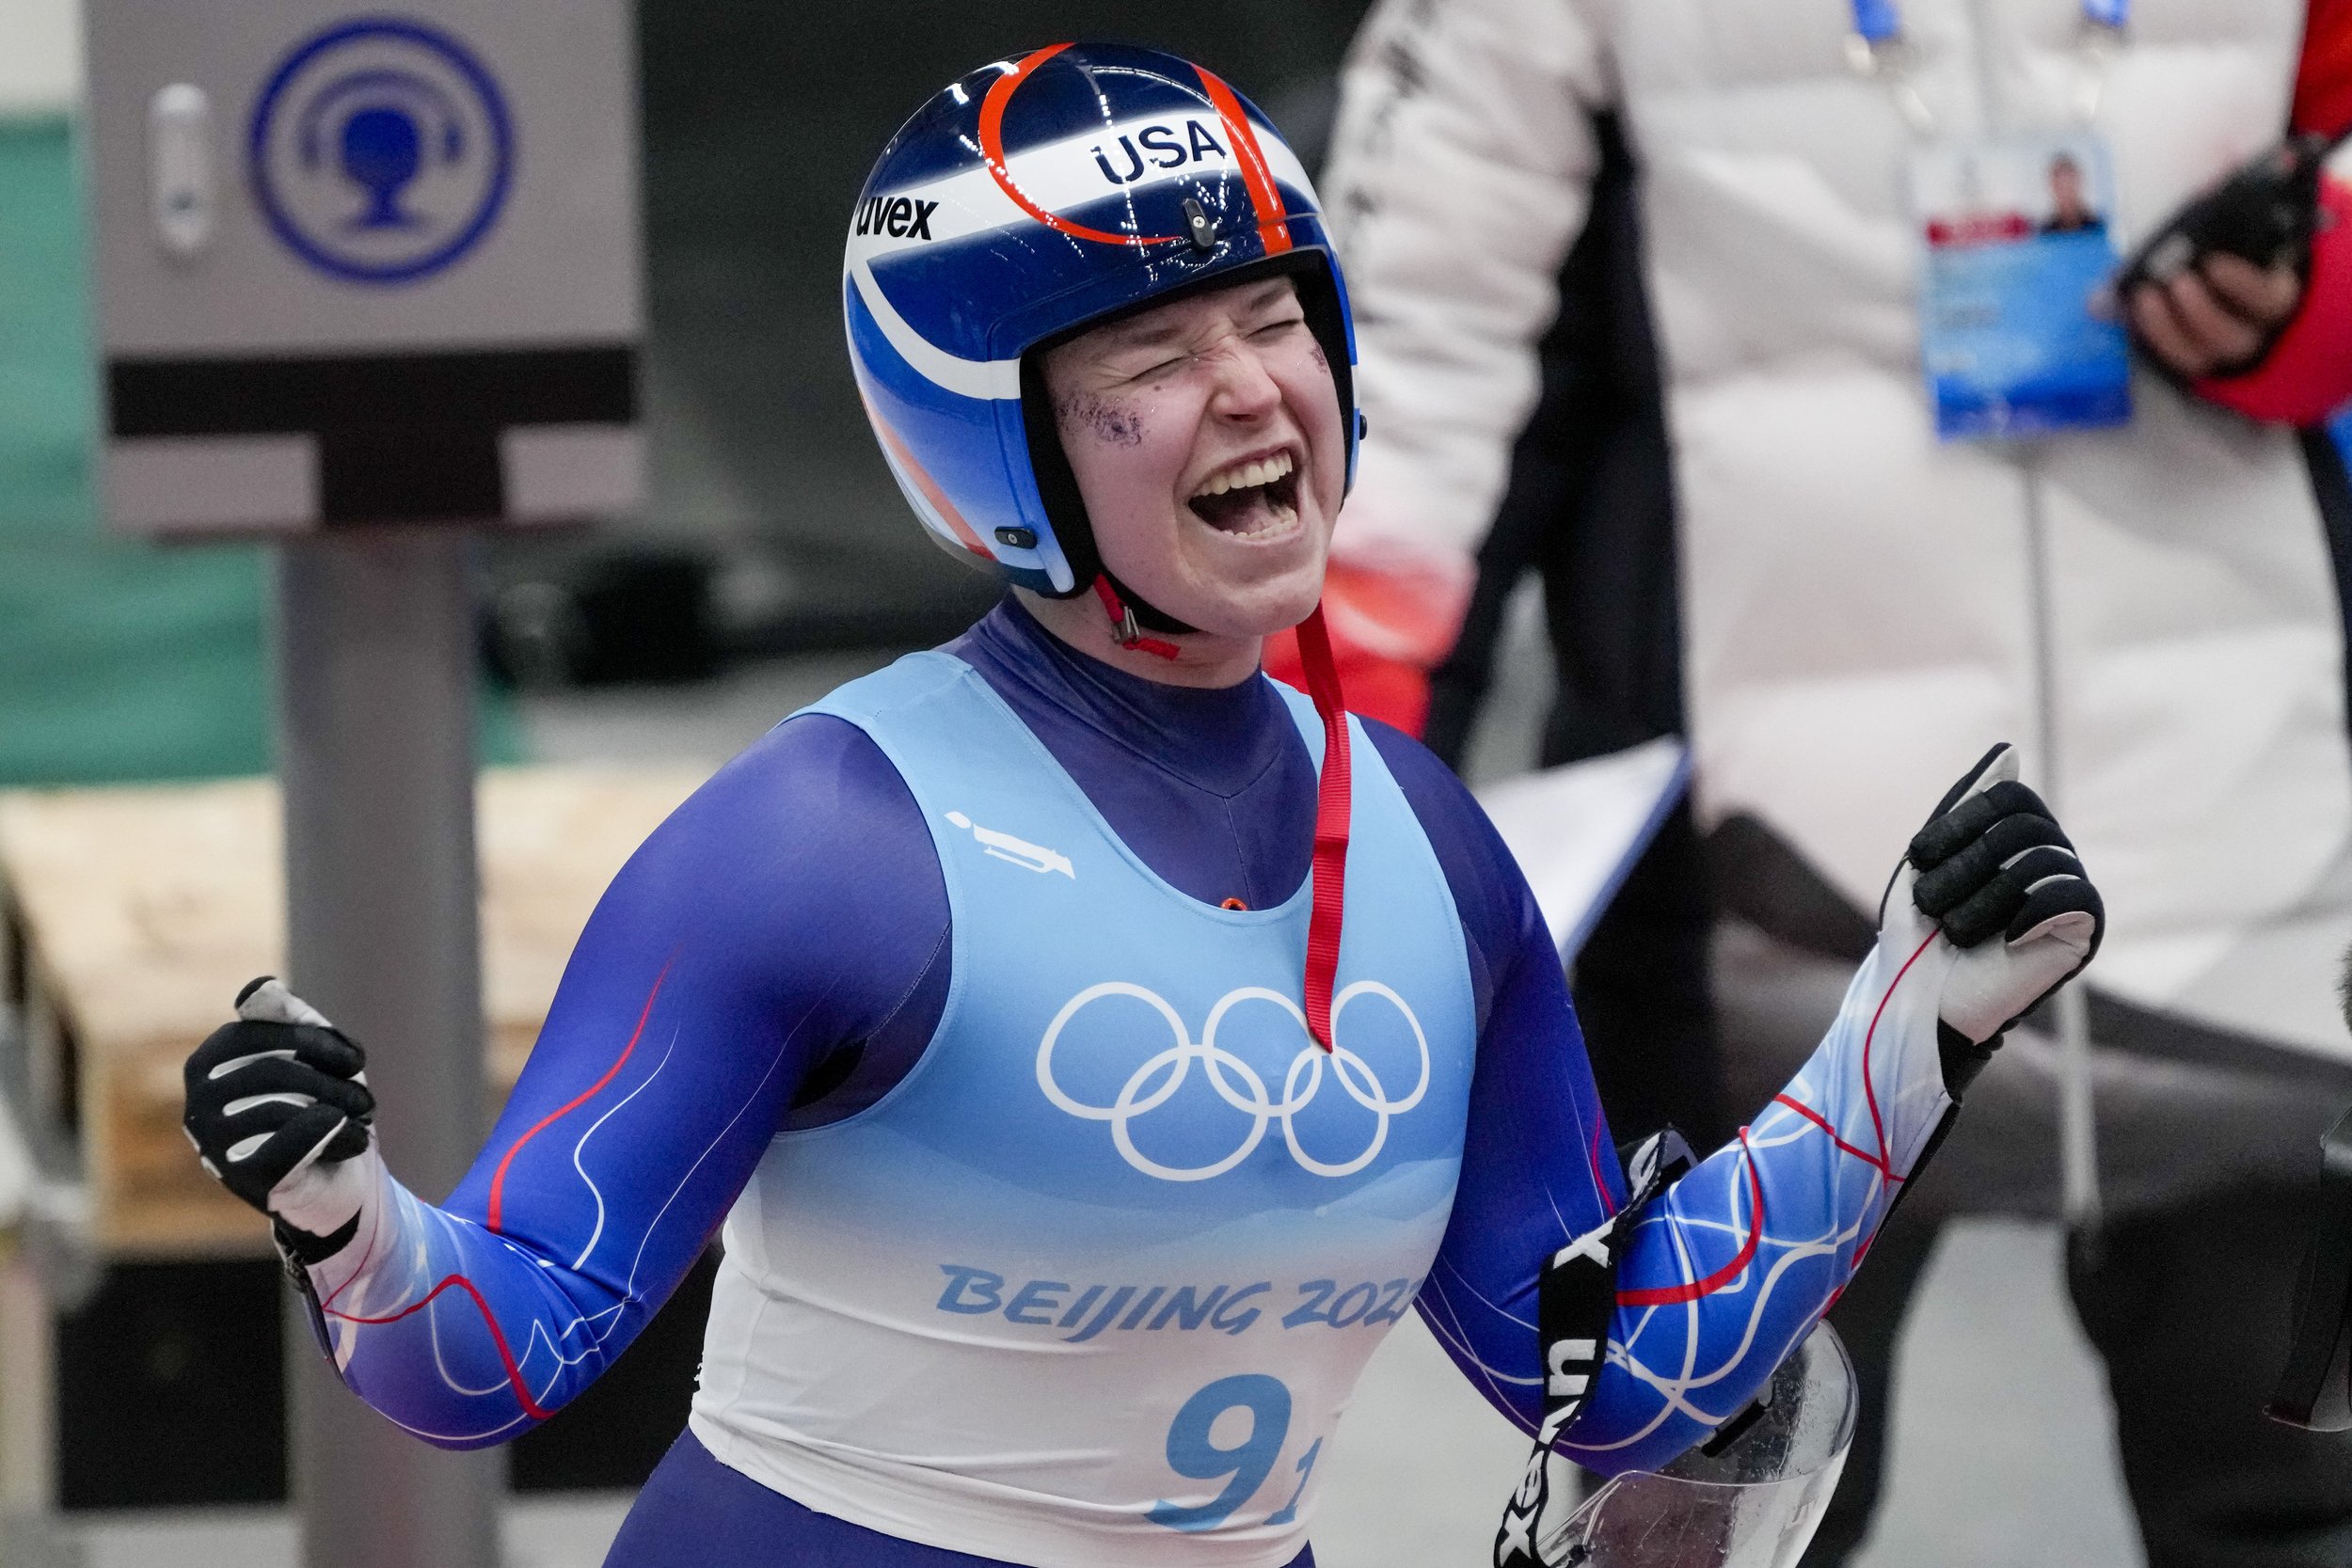  Ashley Farquharson, of the United States, celebrates after finishing her rung in the luge team relay at the 2022 Winter Olympics, Thursday, Feb. 10, 2022, in the Yanqing district of Beijing. (AP Photo/Mark Schiefelbein) 